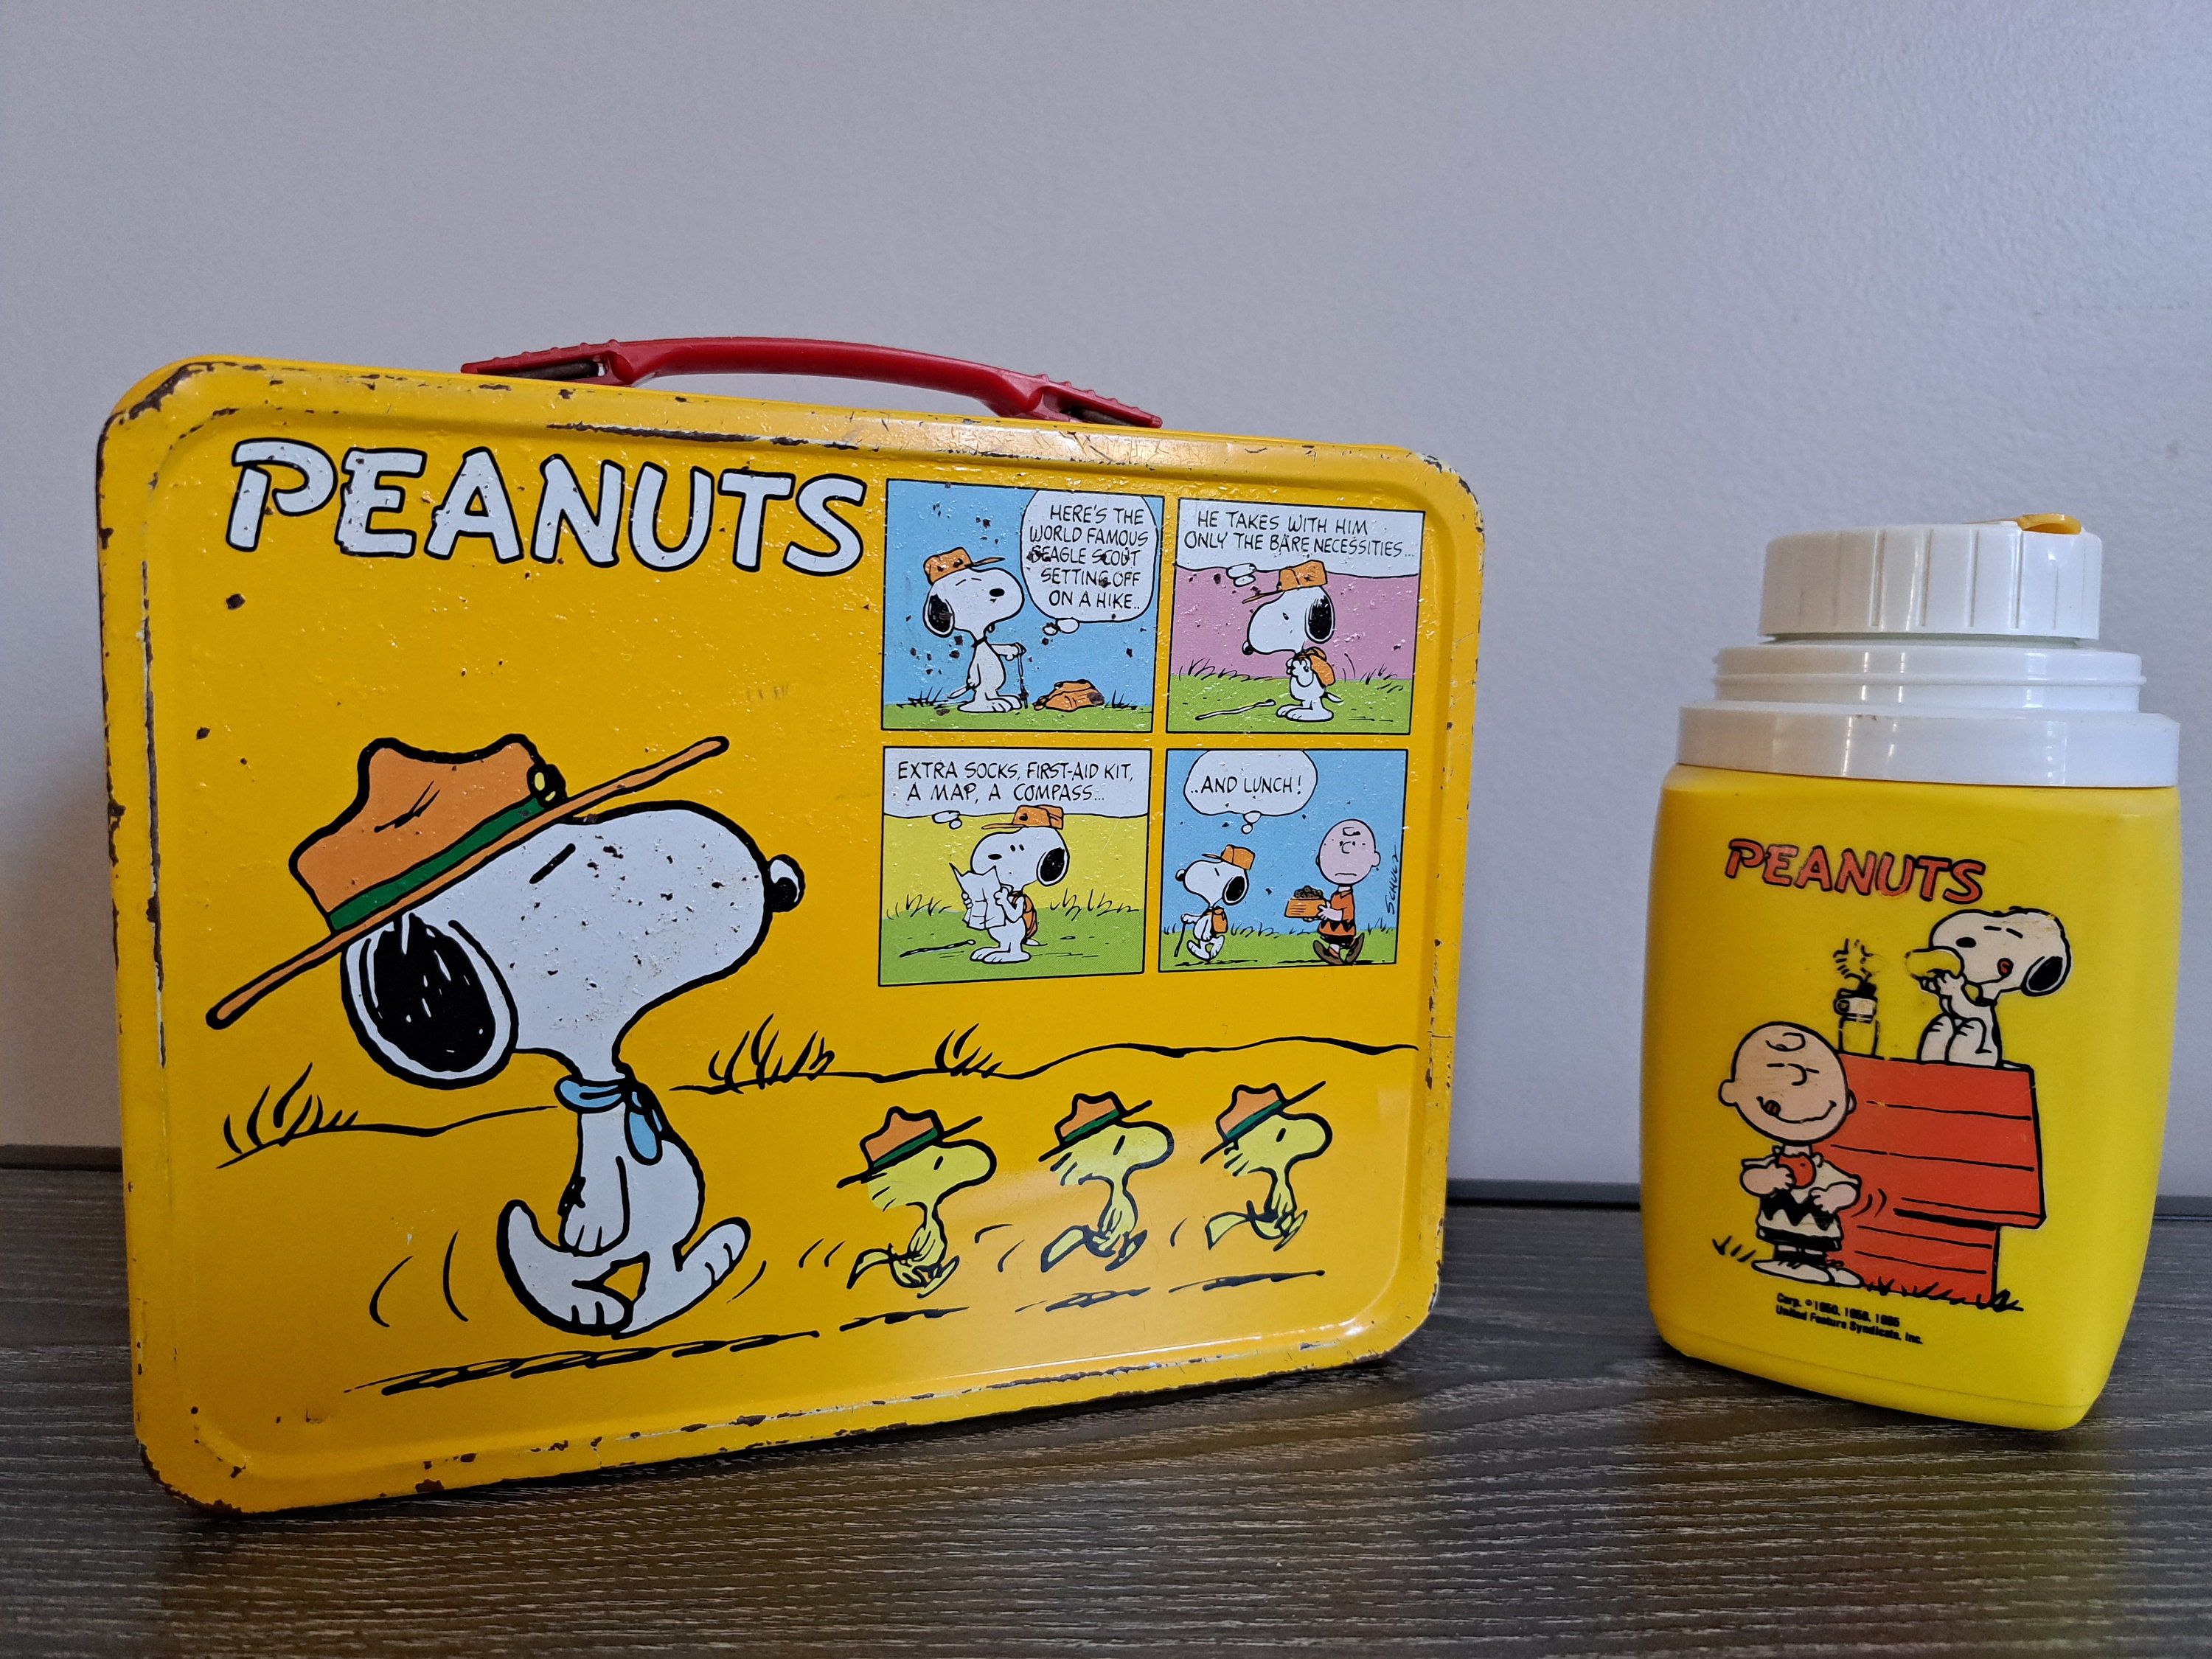 Vintage Peanuts University Lunch Box and Thermos Bottle